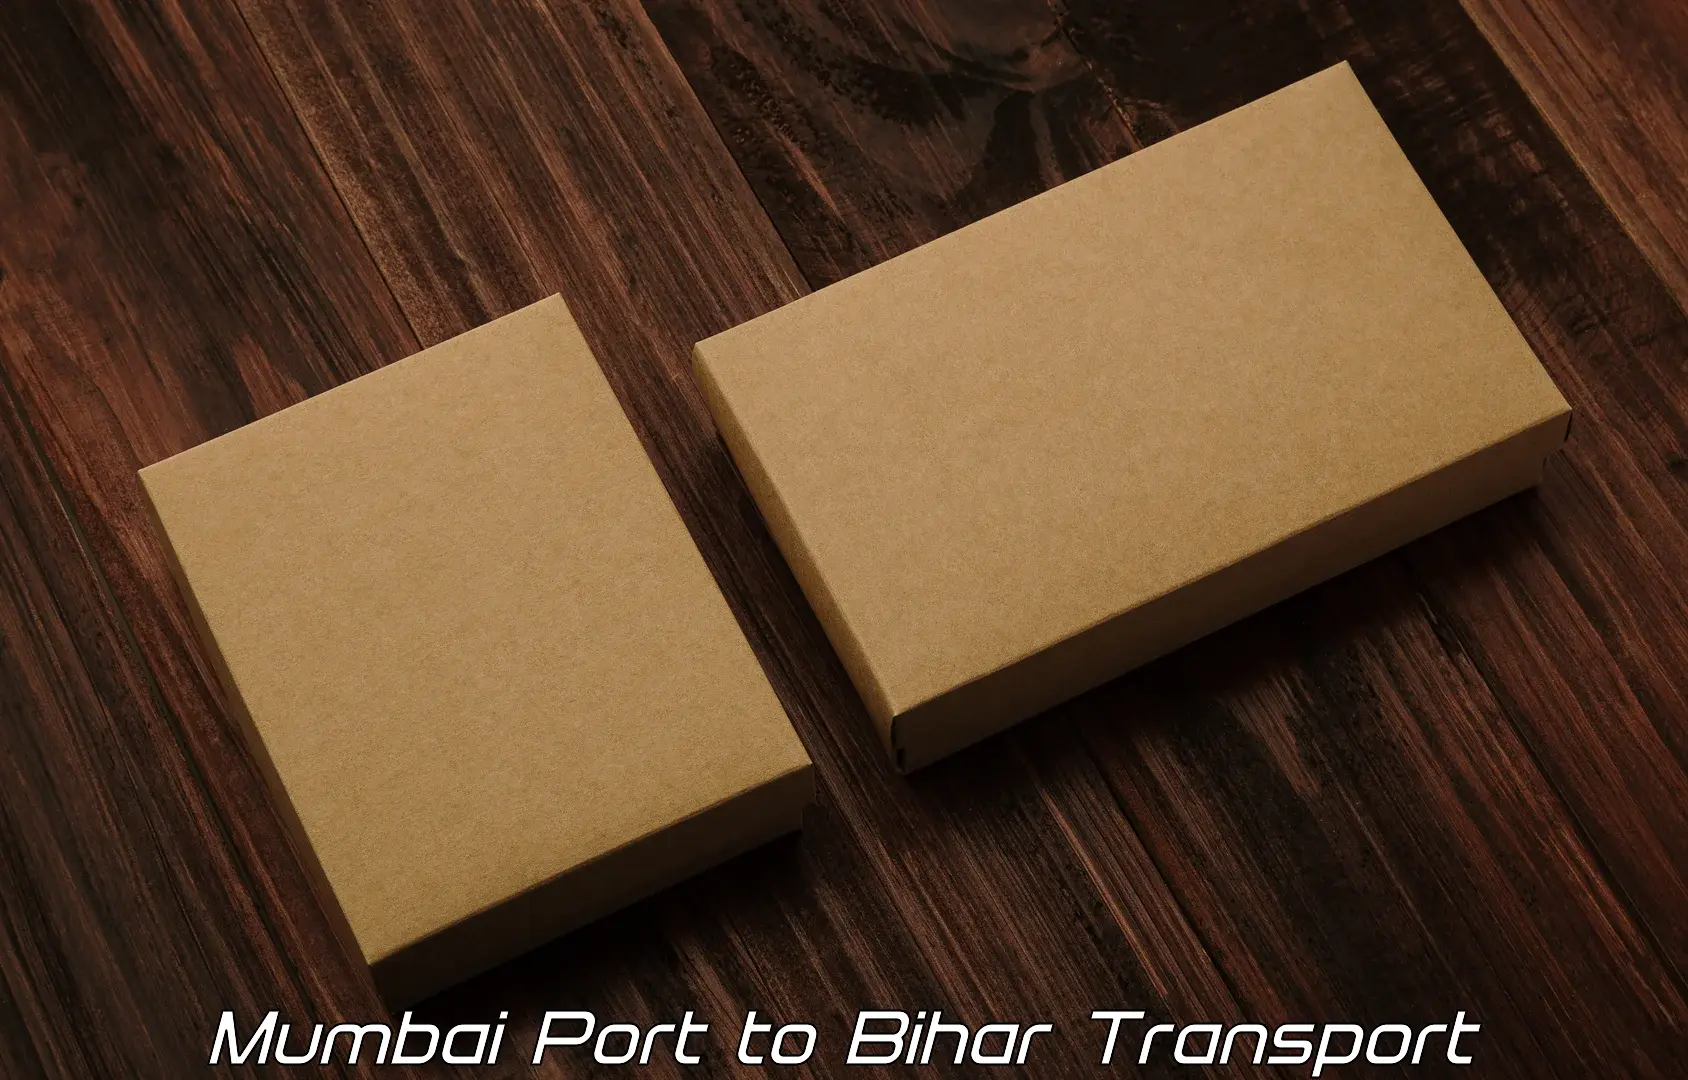 Transport bike from one state to another Mumbai Port to Murliganj